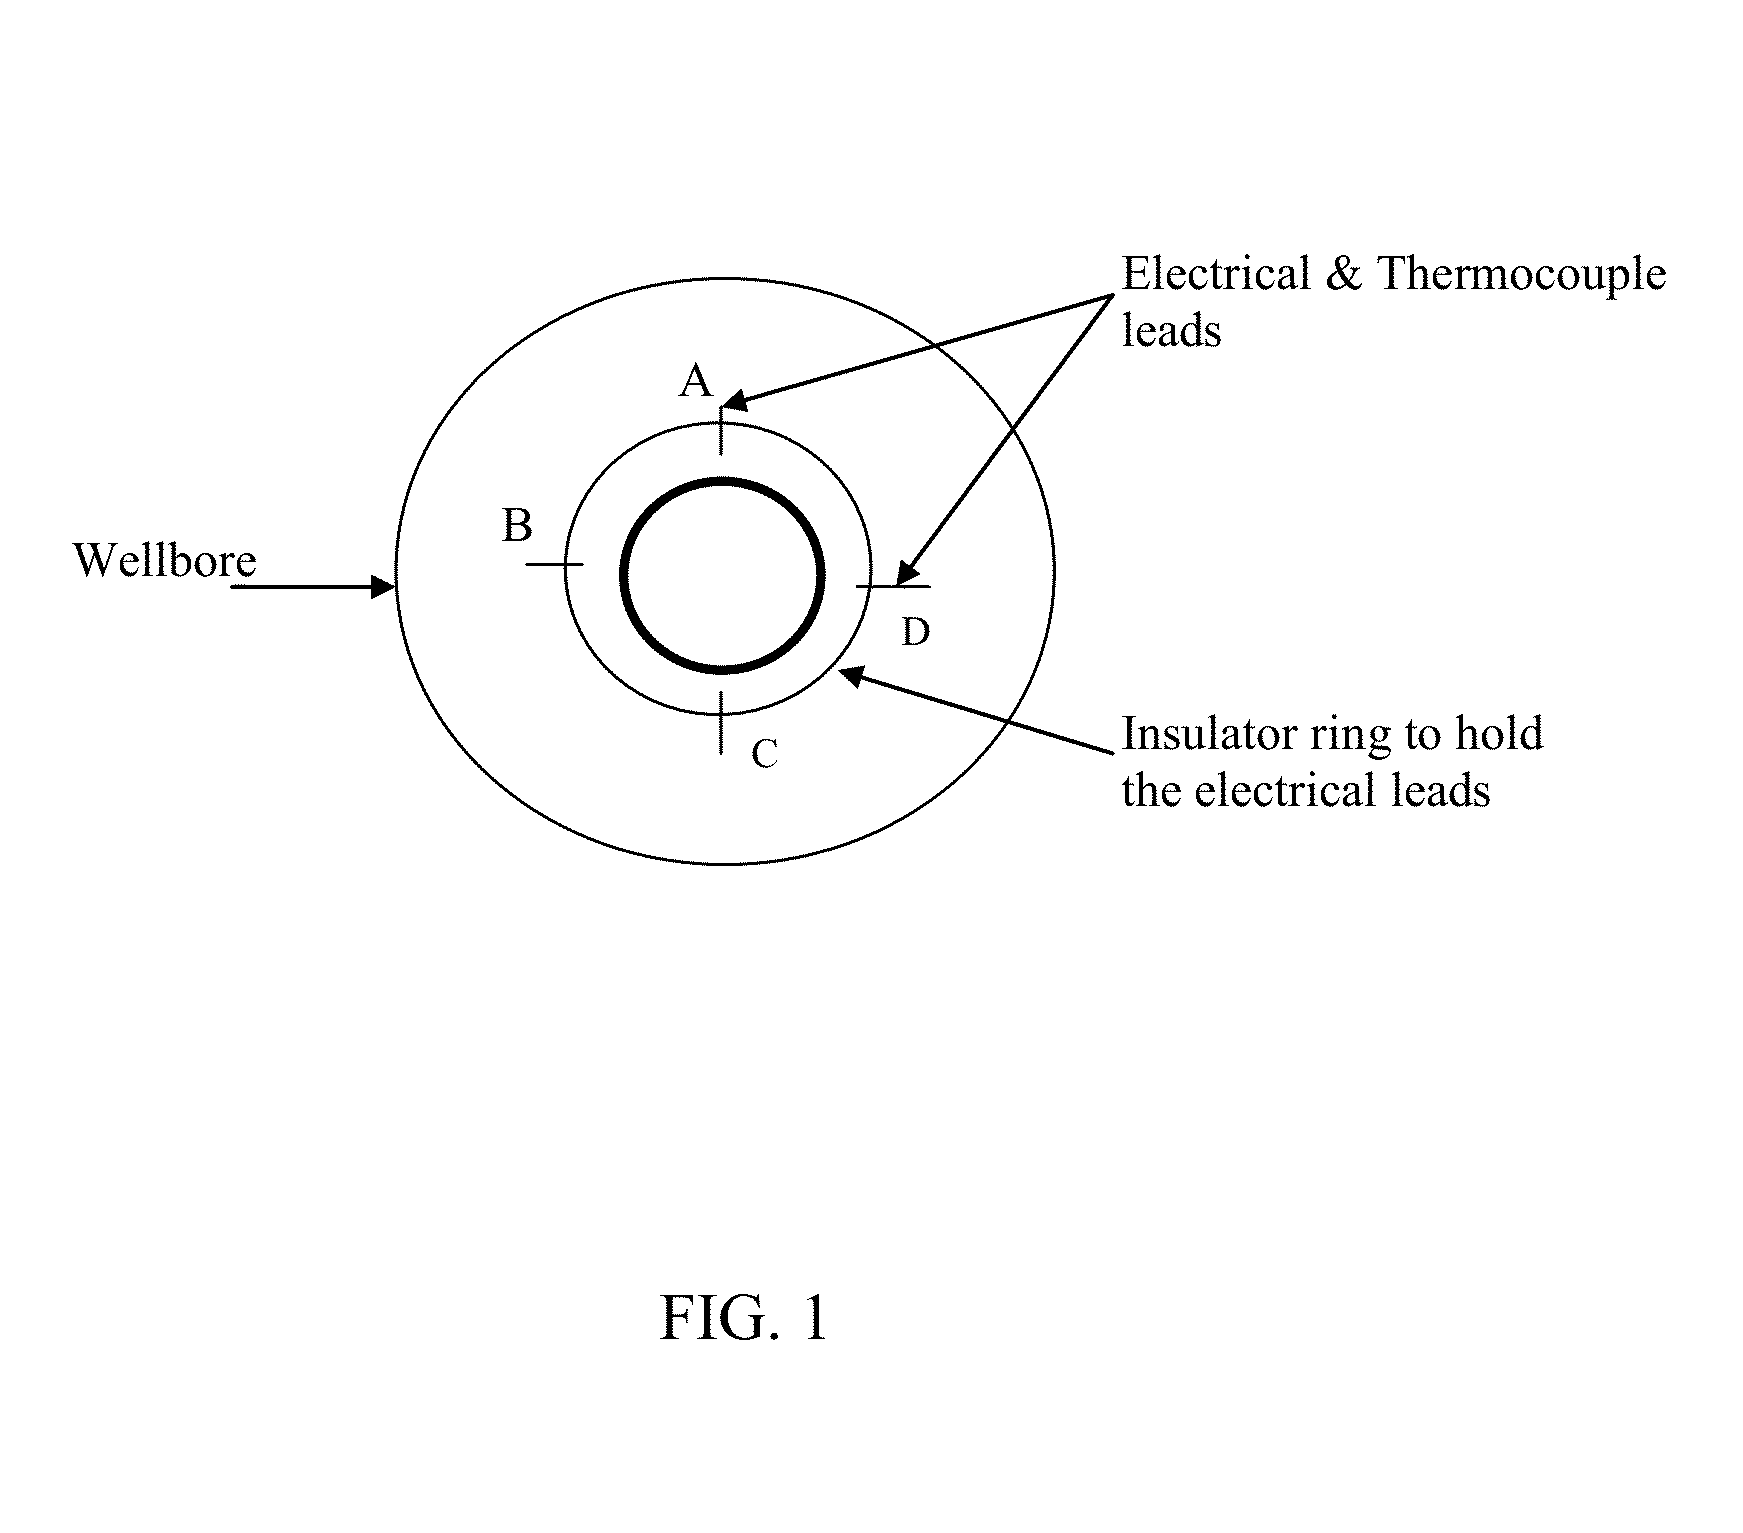 Method of Real Time Monitoring of Well Operations Using Self-Sensing Treatment Fluids